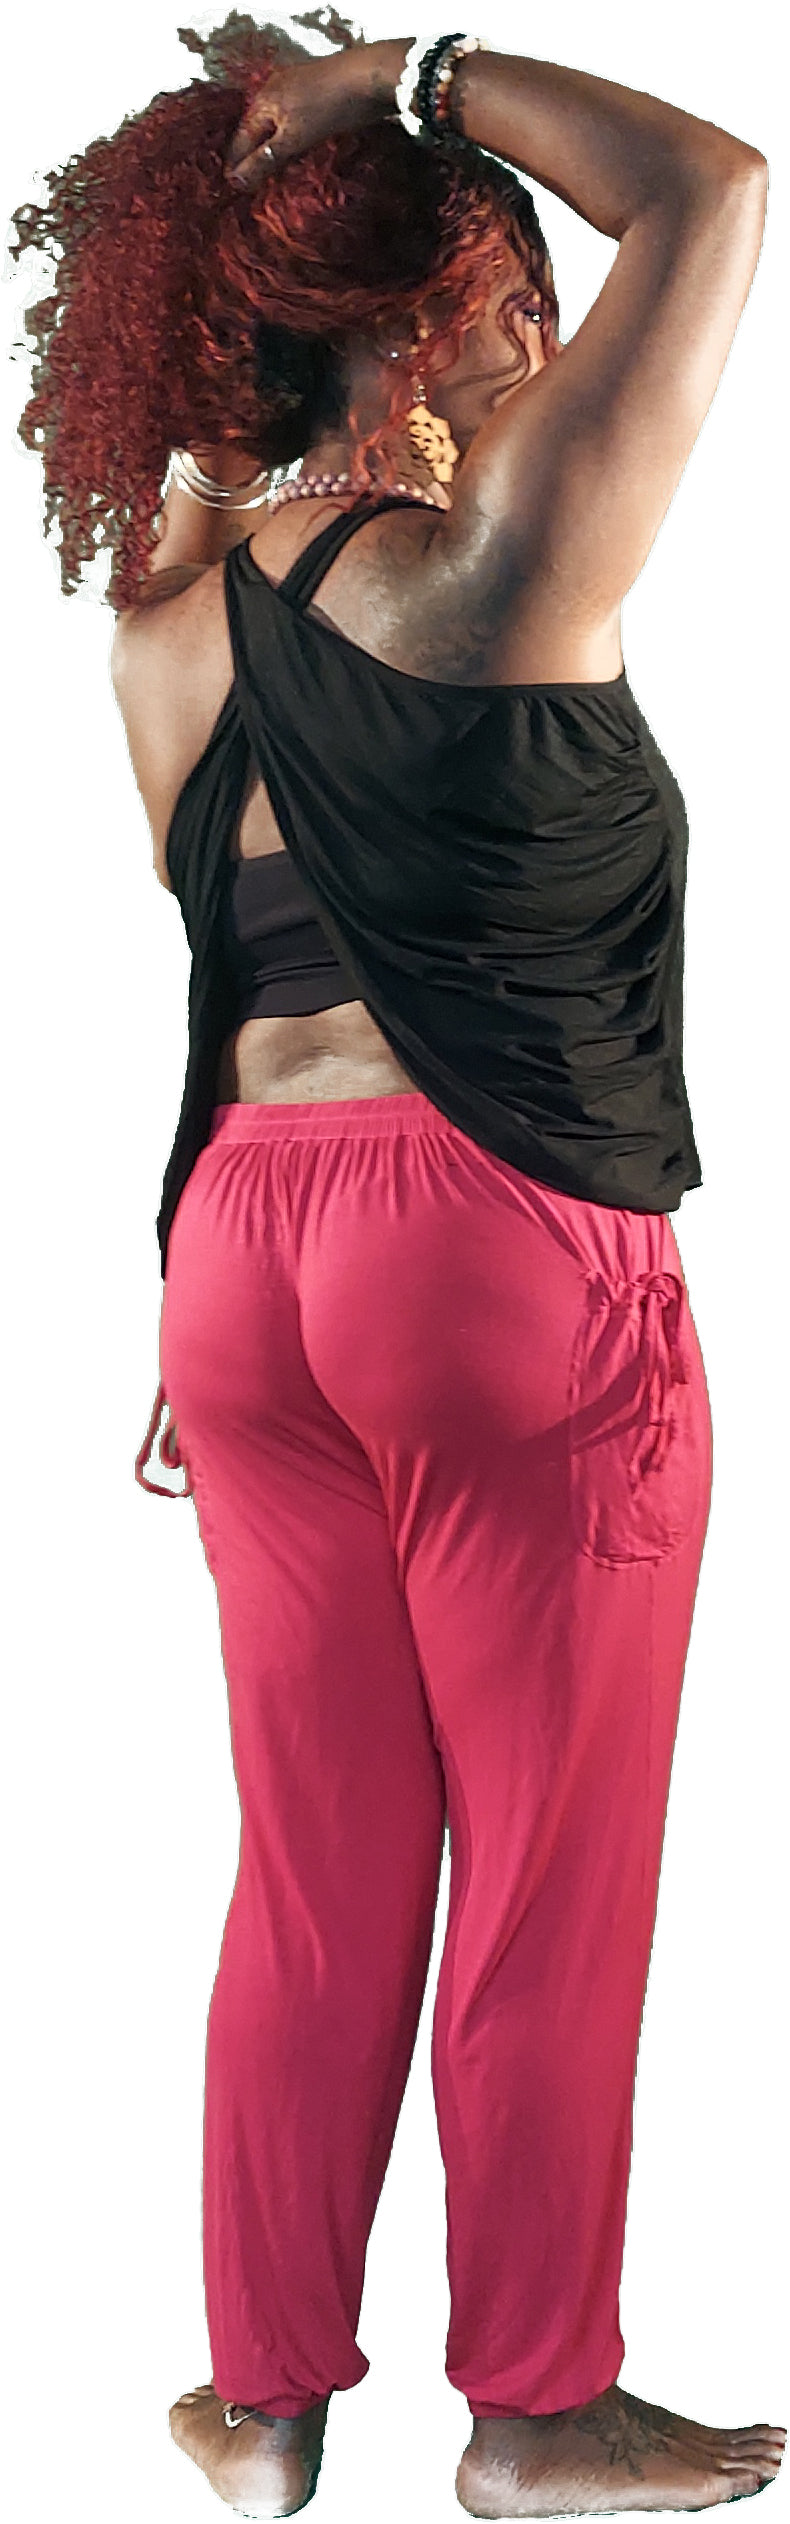 YOGAZ Eco-Friendly Bamboo Hot-Pink  Pants with our Signature Pocket in Pocket design